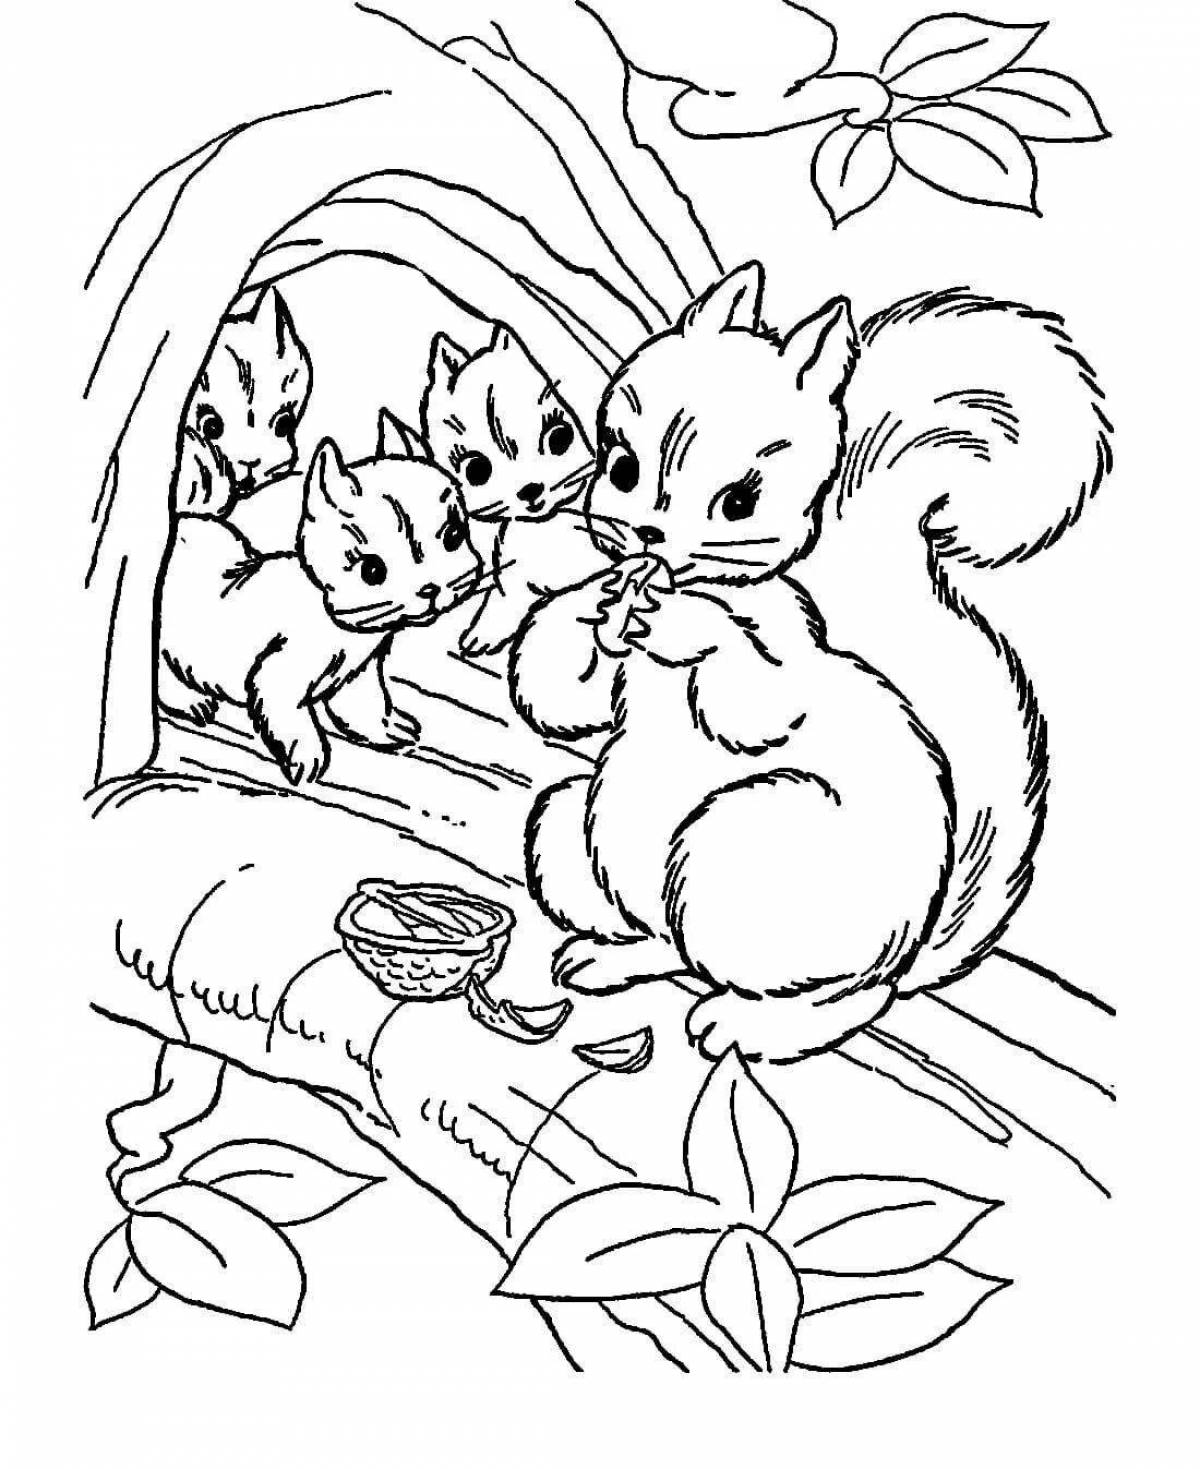 Exotic forest animals coloring page